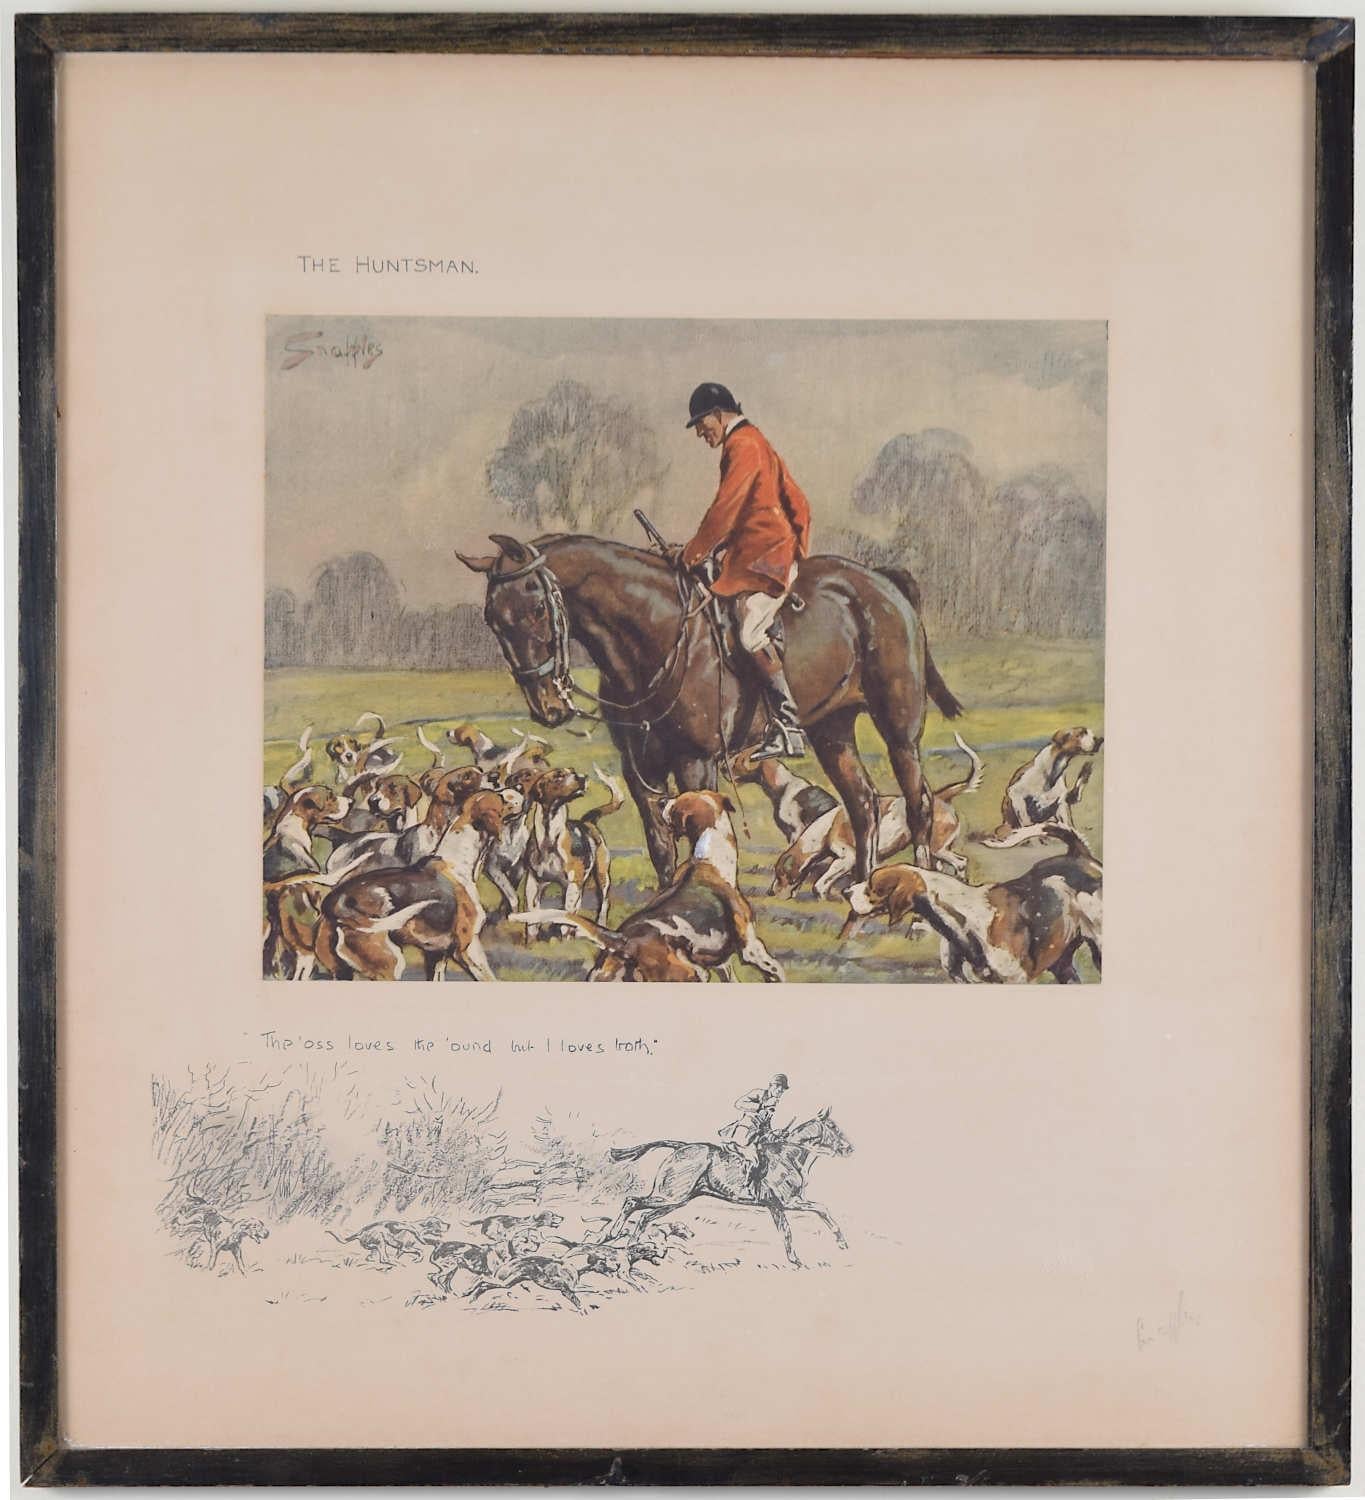 Charles "Snaffles" Johnson Payne Landscape Print – Snaffles: "The Huntsman" signierte Lithographie - "The 'oss loves the 'ound"